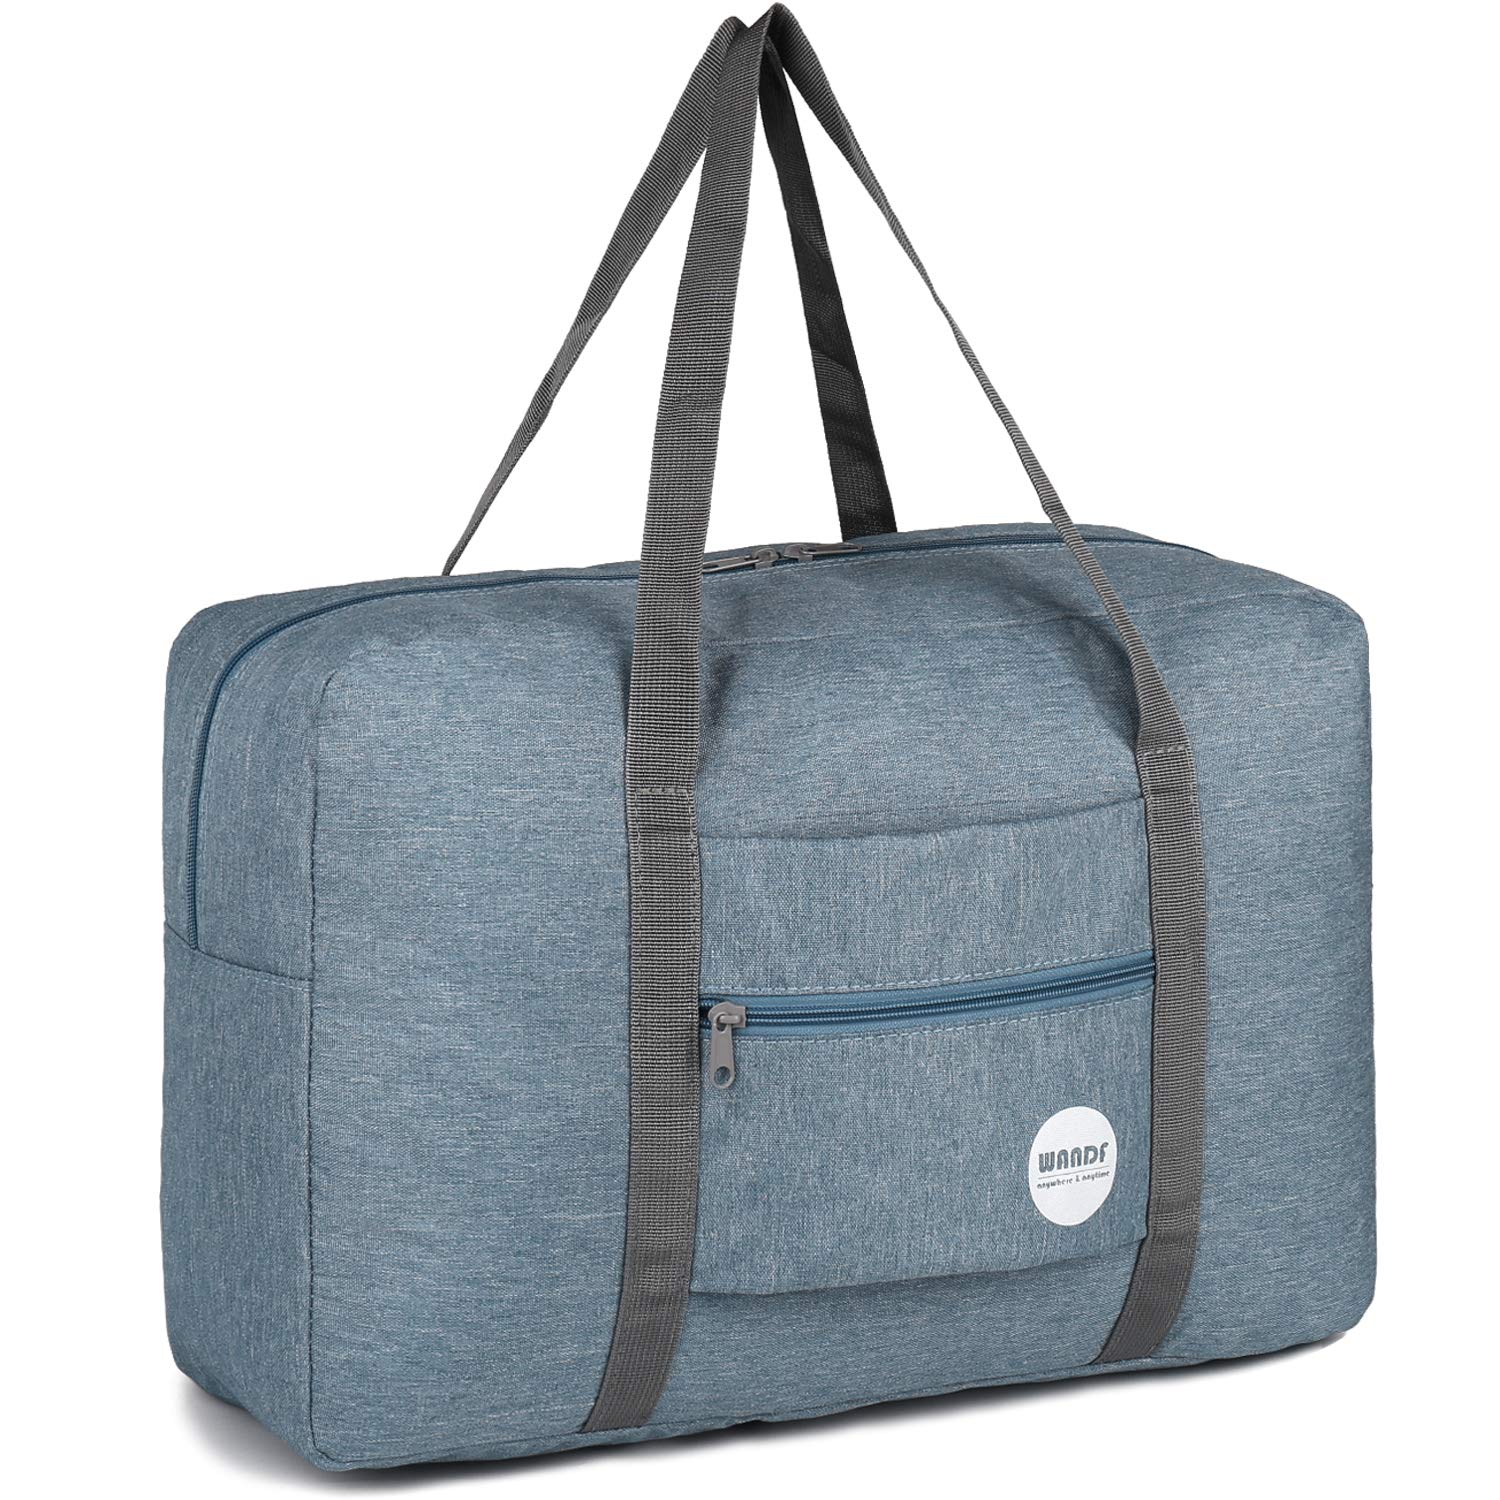 The 3in1 NOVA Duffle Garment Suitcase might be the only travel bag